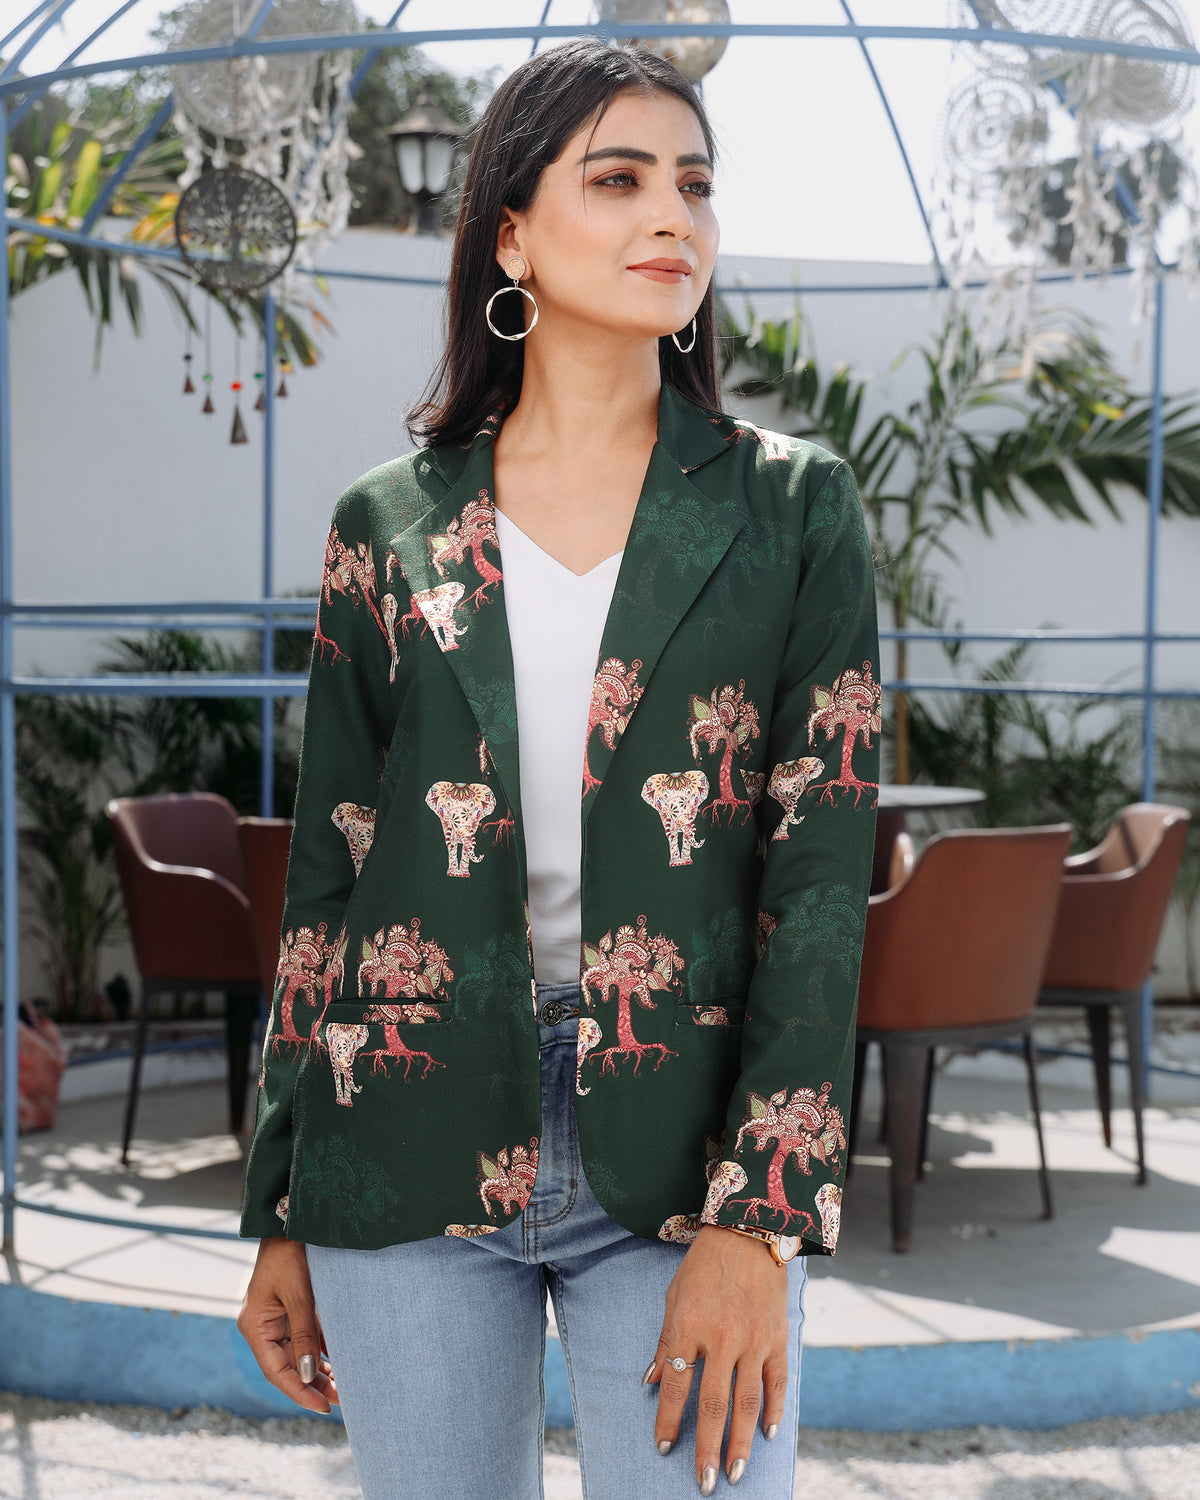 The Talk Of The Town Ethnic Women's Jacket